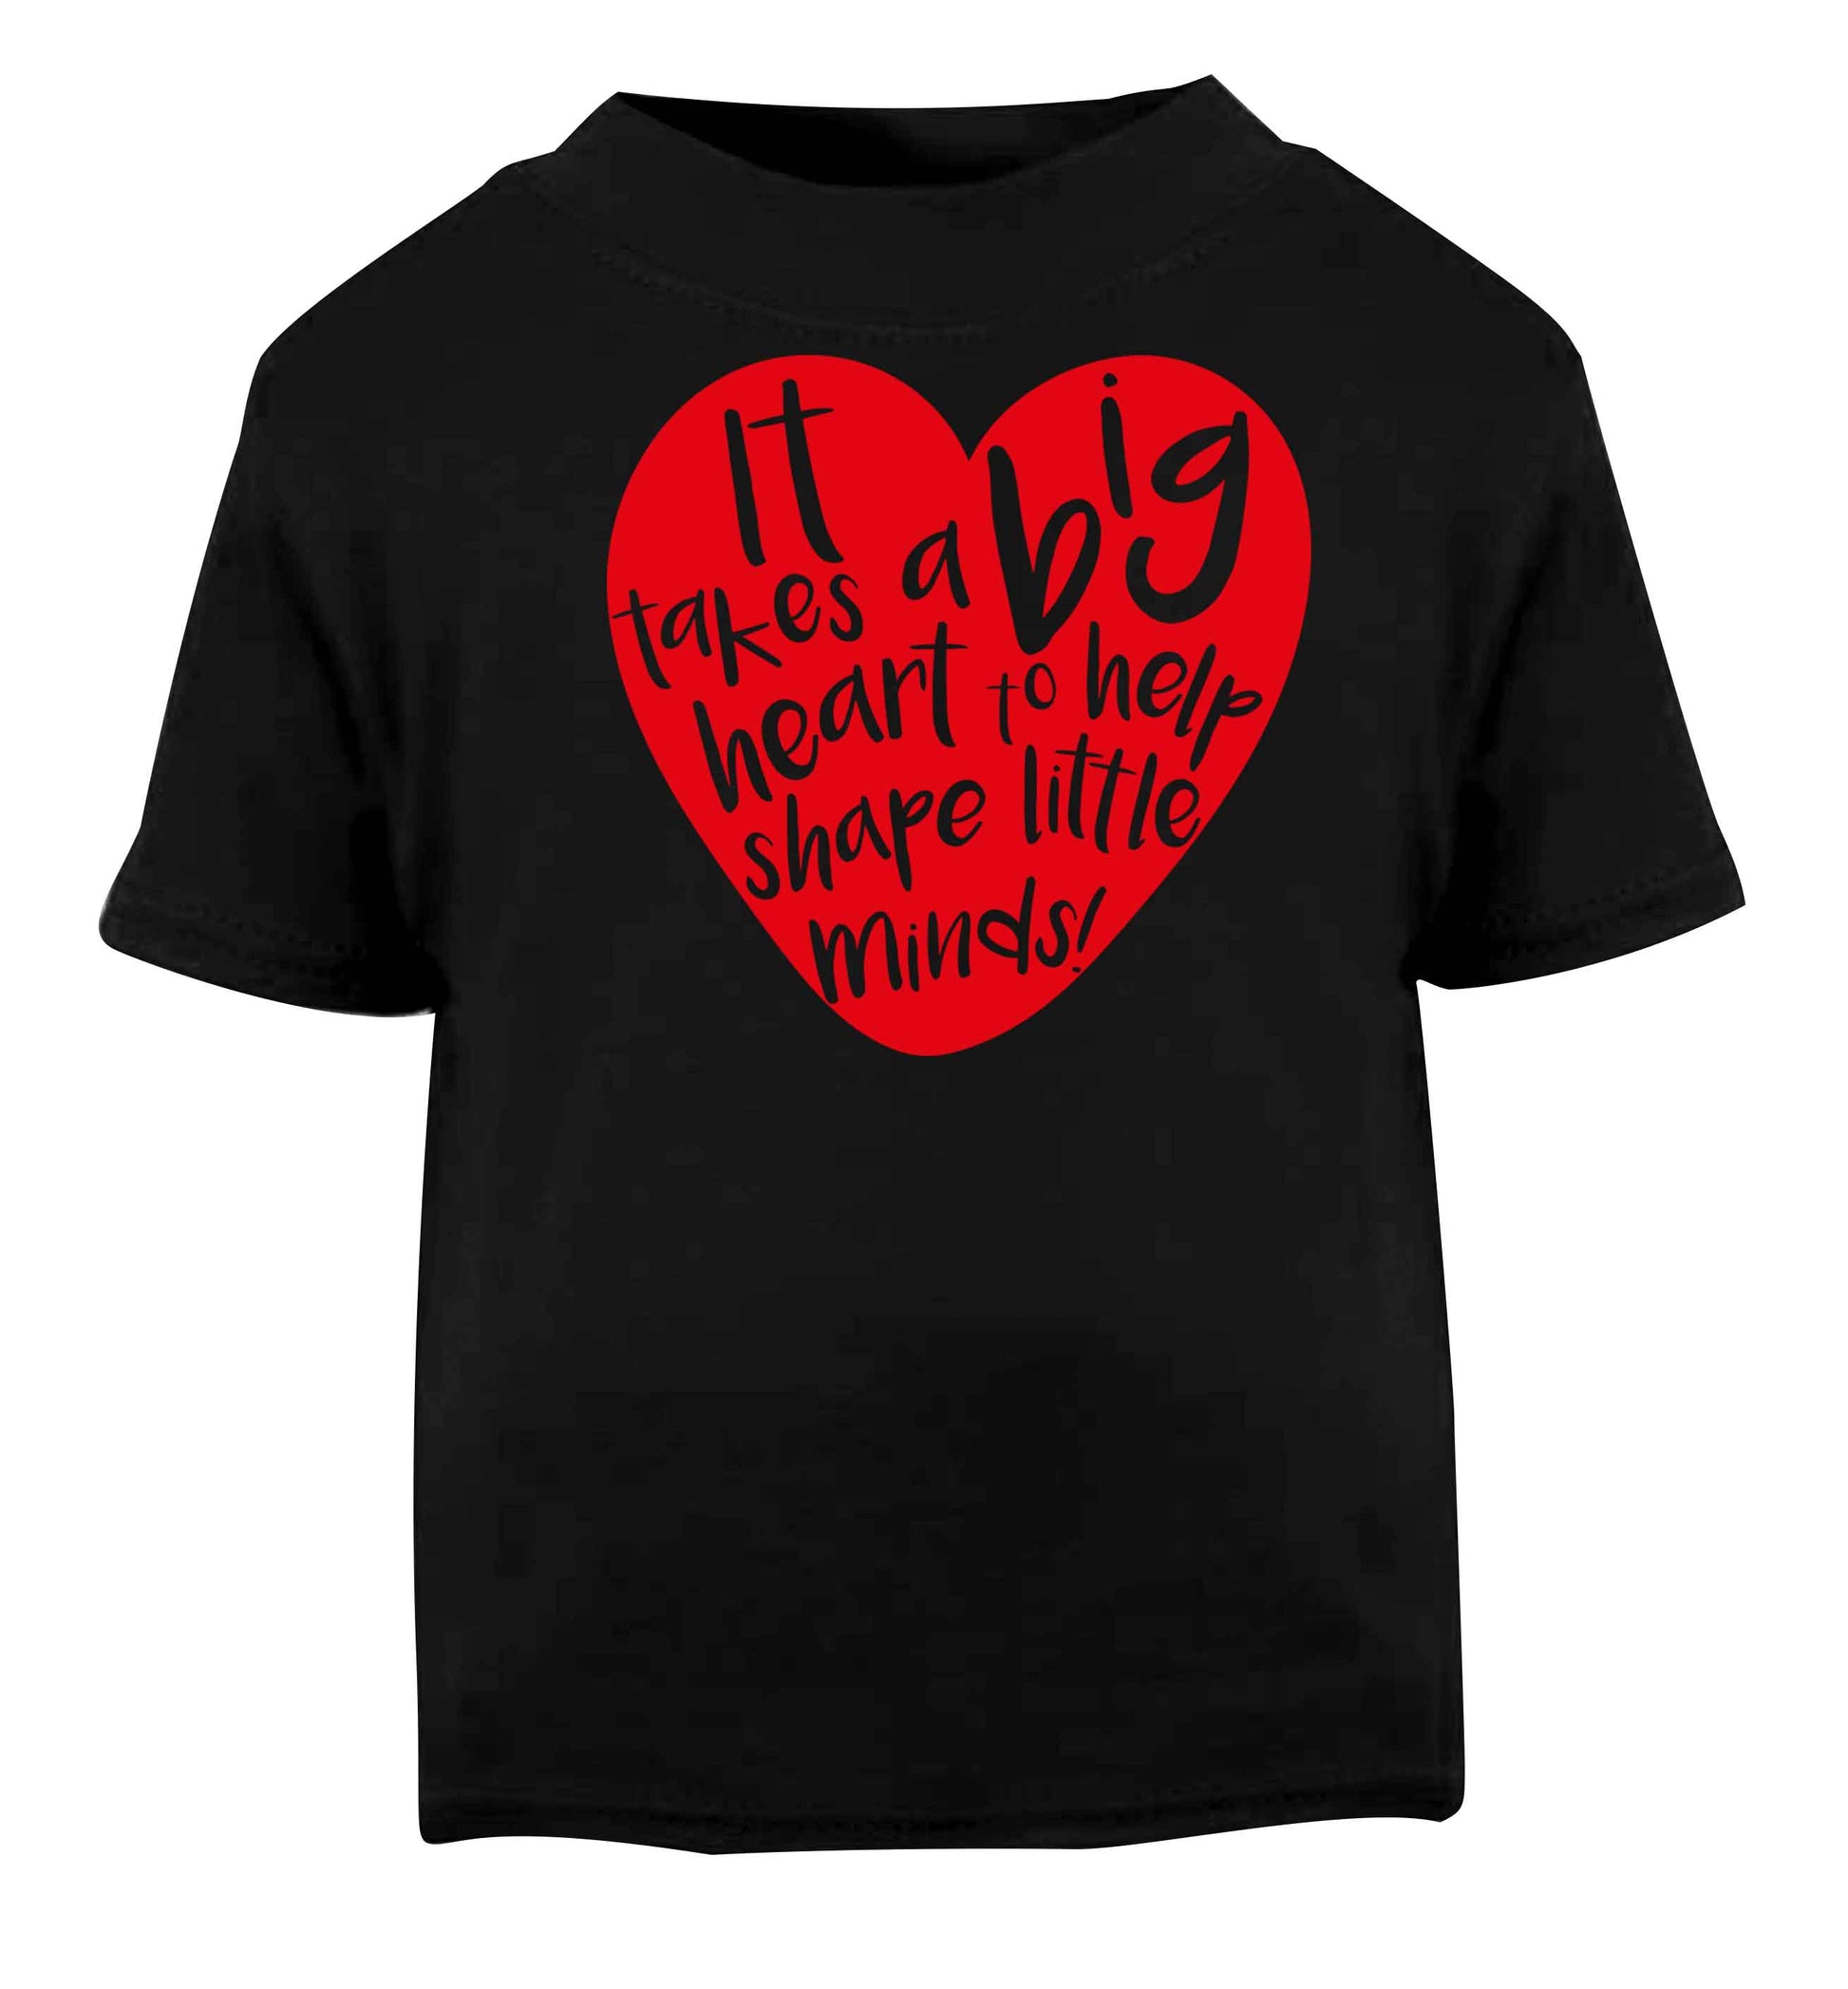 It takes a big heart to help shape little minds Black baby toddler Tshirt 2 years